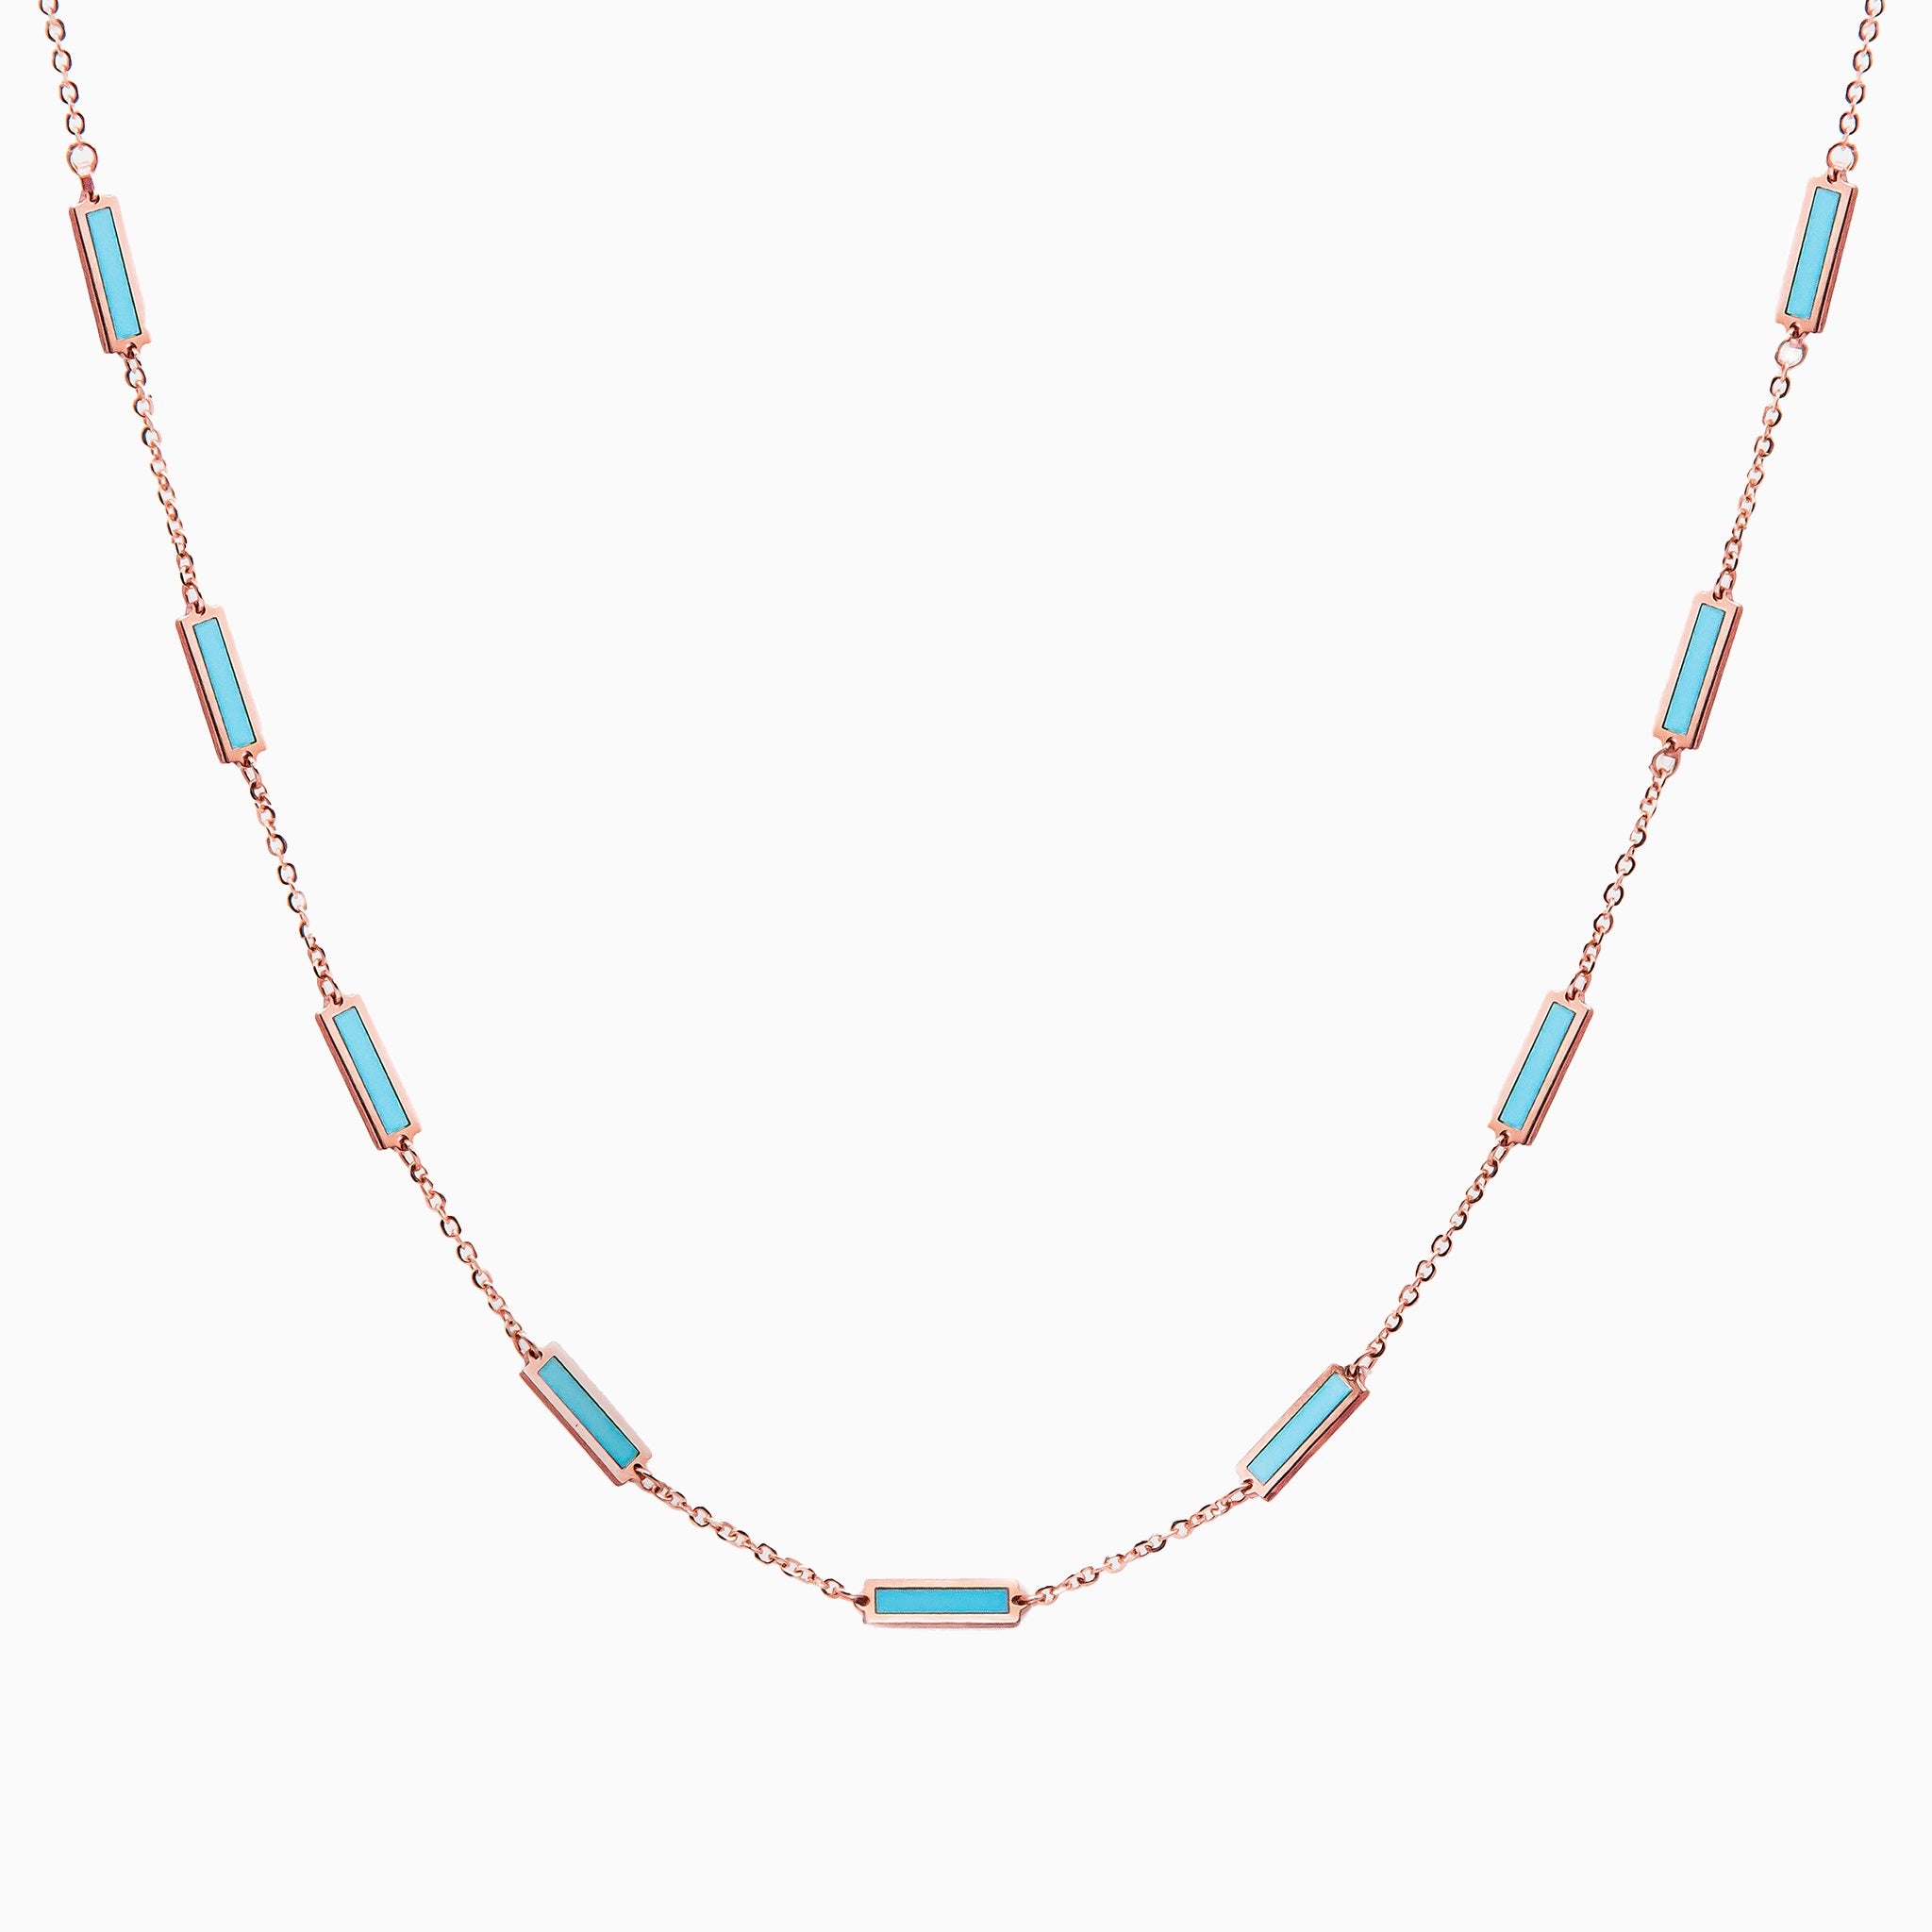 Floating turquoise necklace - 3 bead – Alicia Coral Jewels